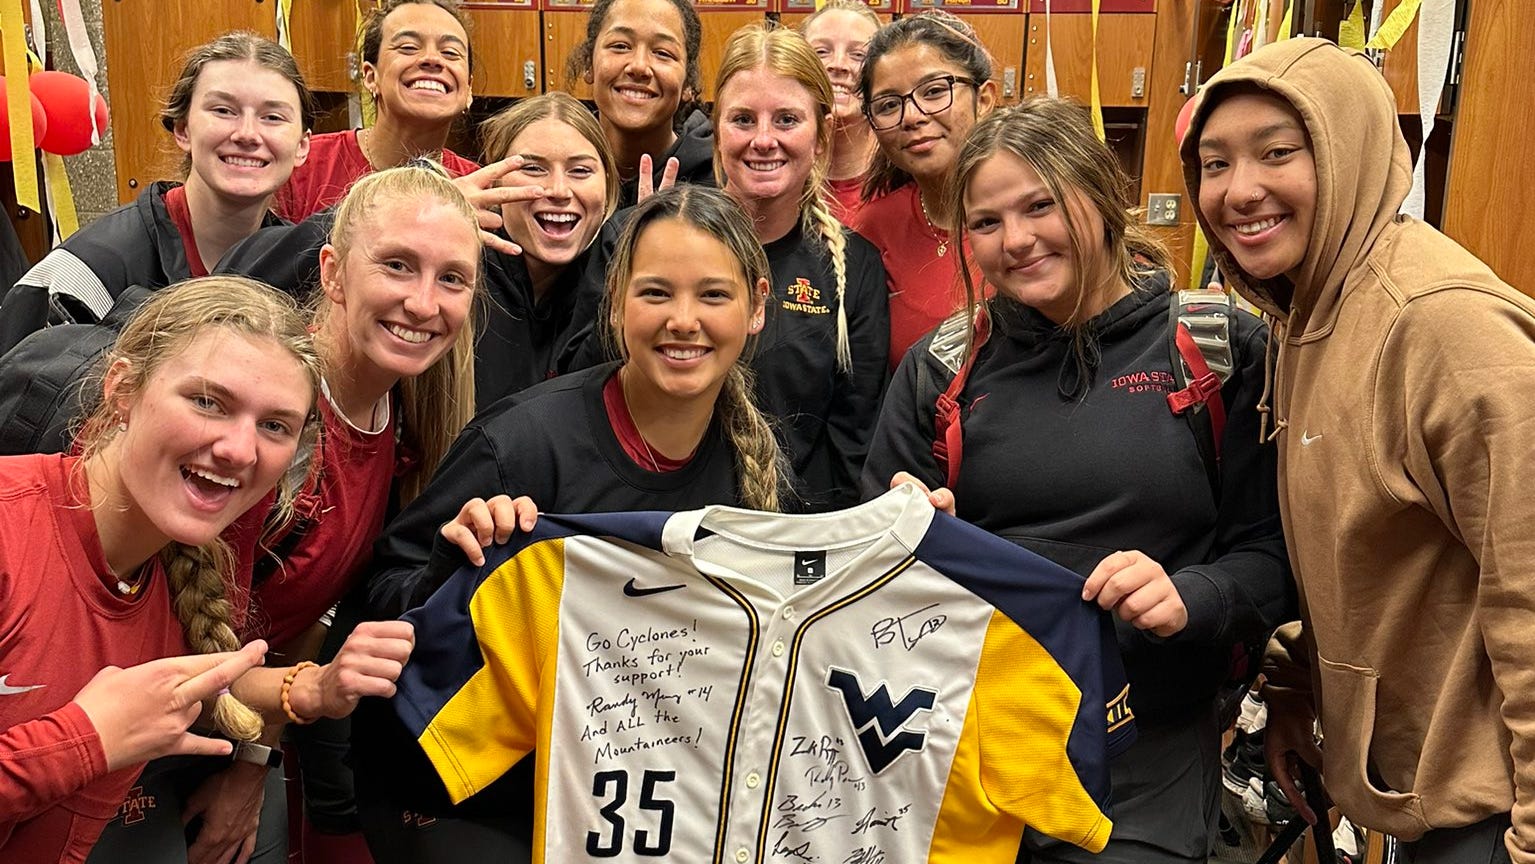 An unlikely friendship: Iowa State softball, West Virginia baseball 'family now'